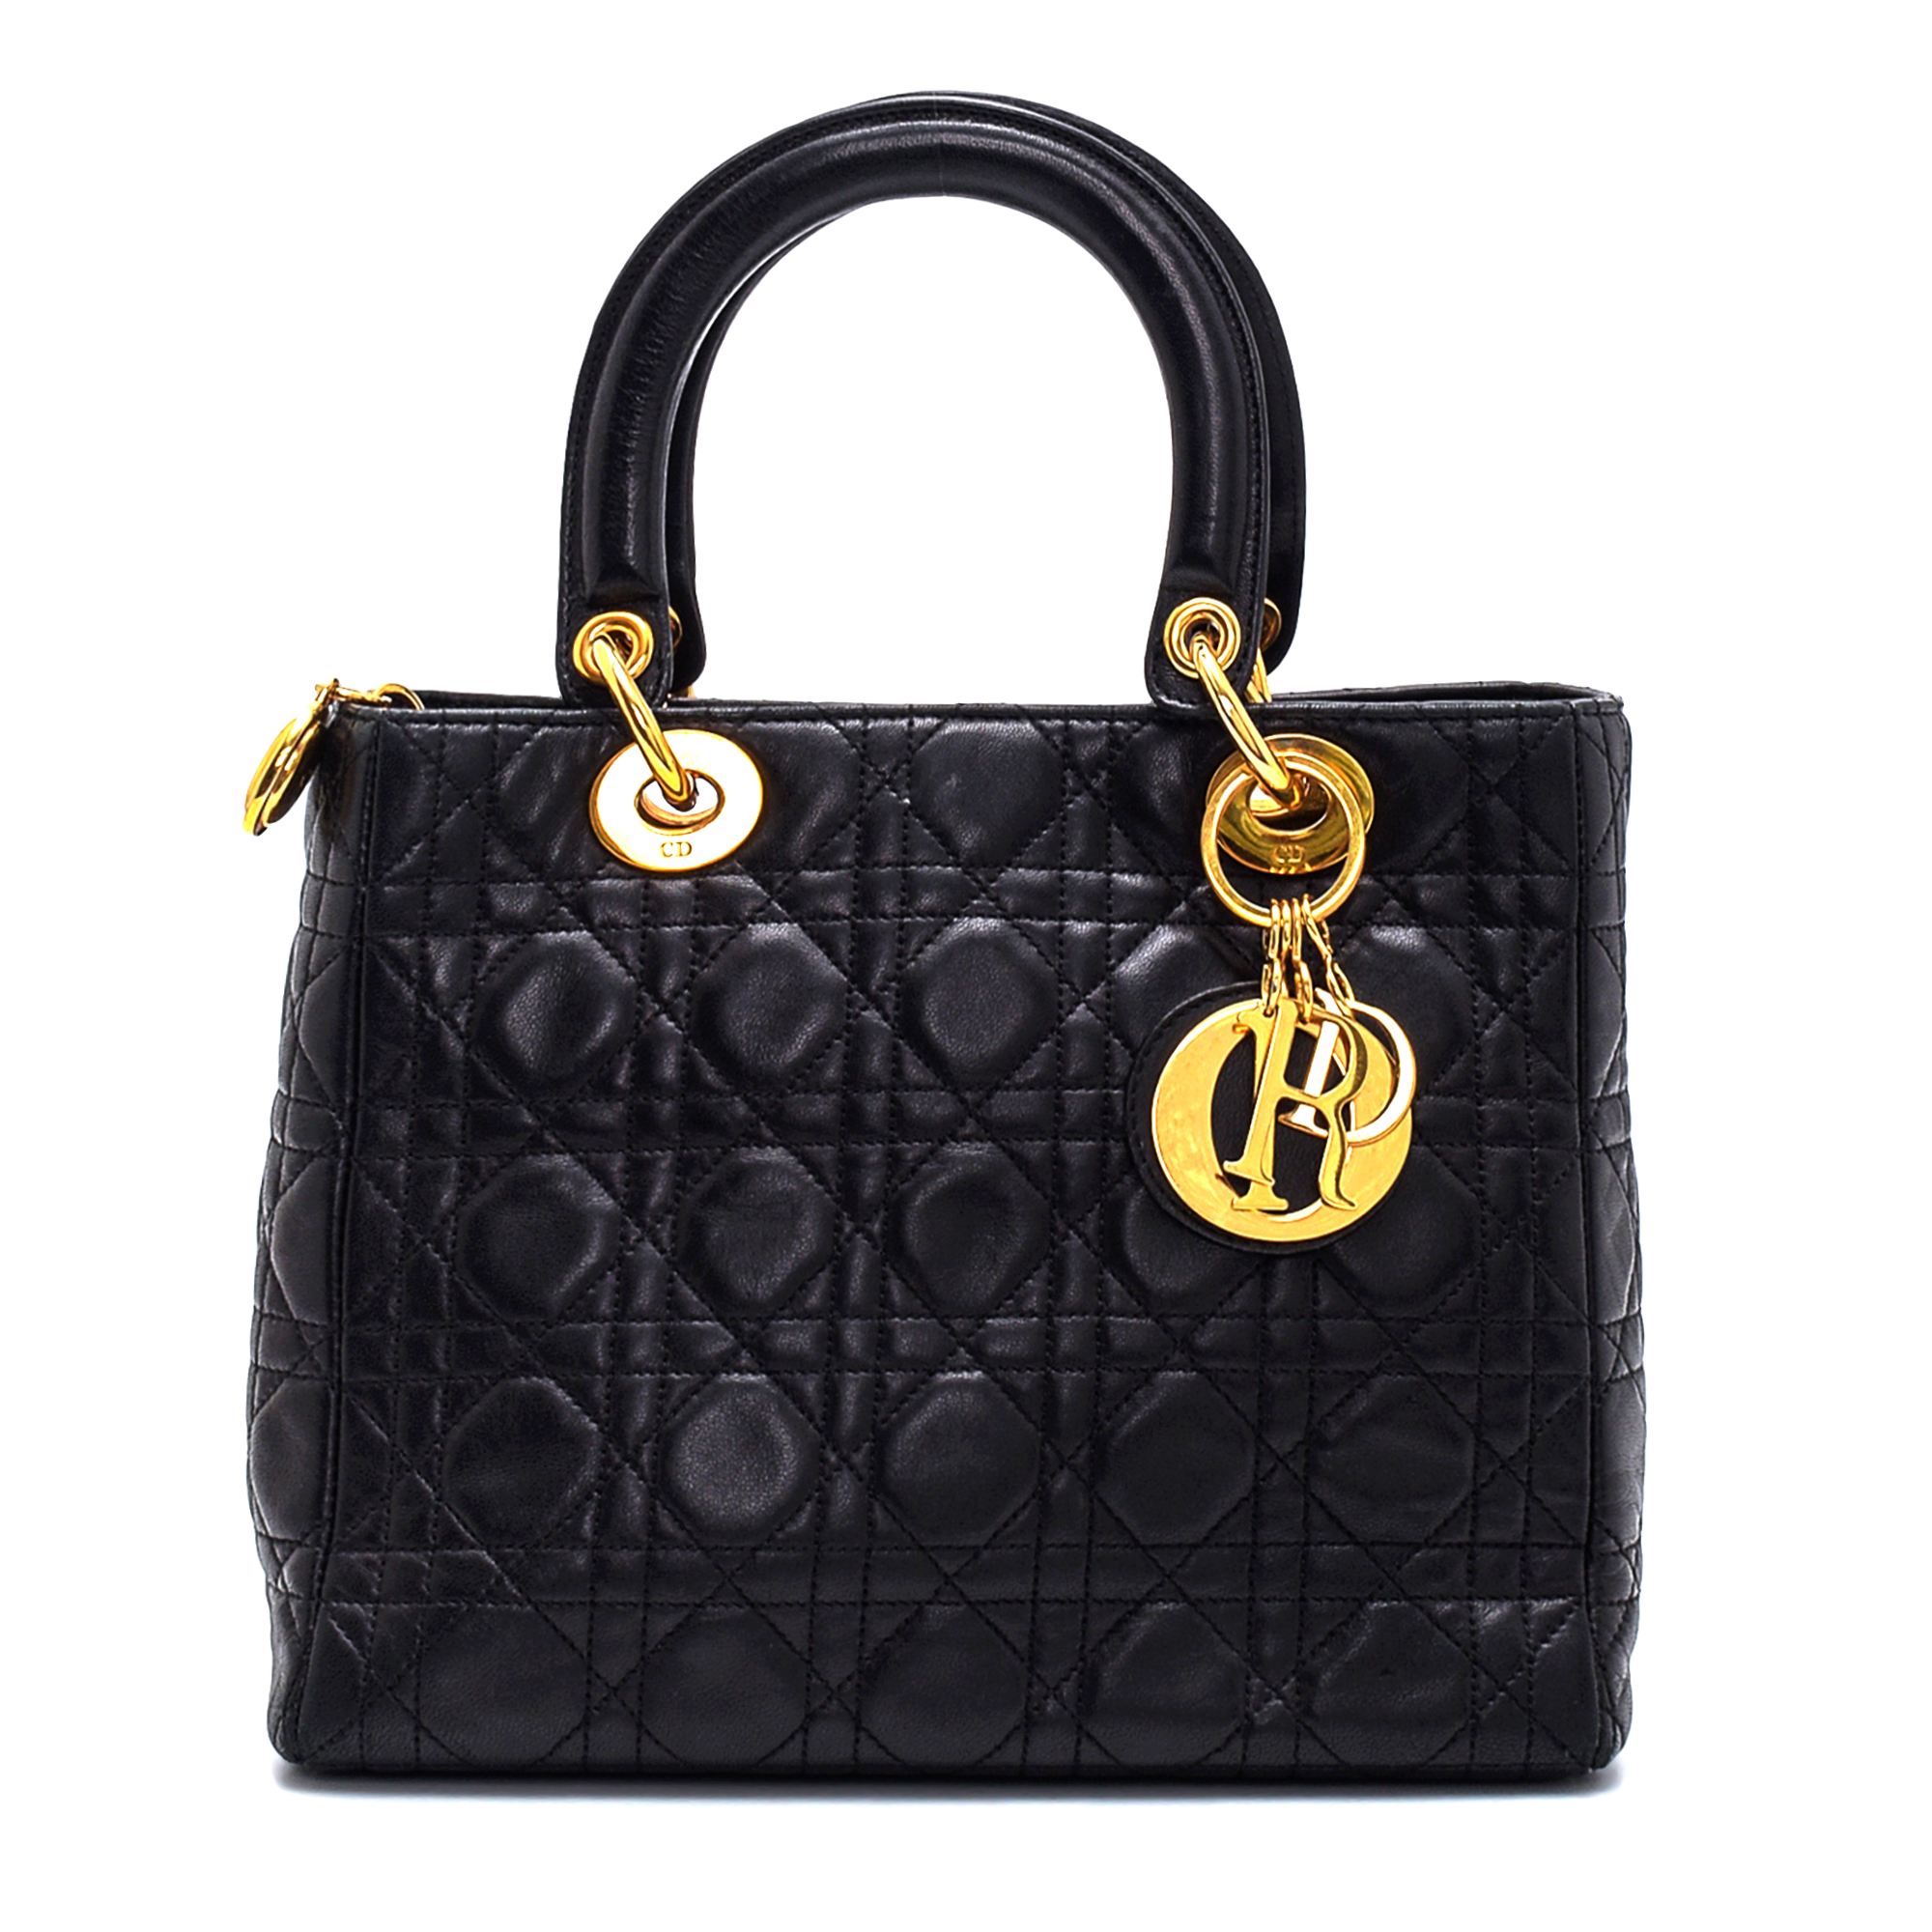 Chanel - Black Lambskin Cannage Leather Small Lady Dior Bag